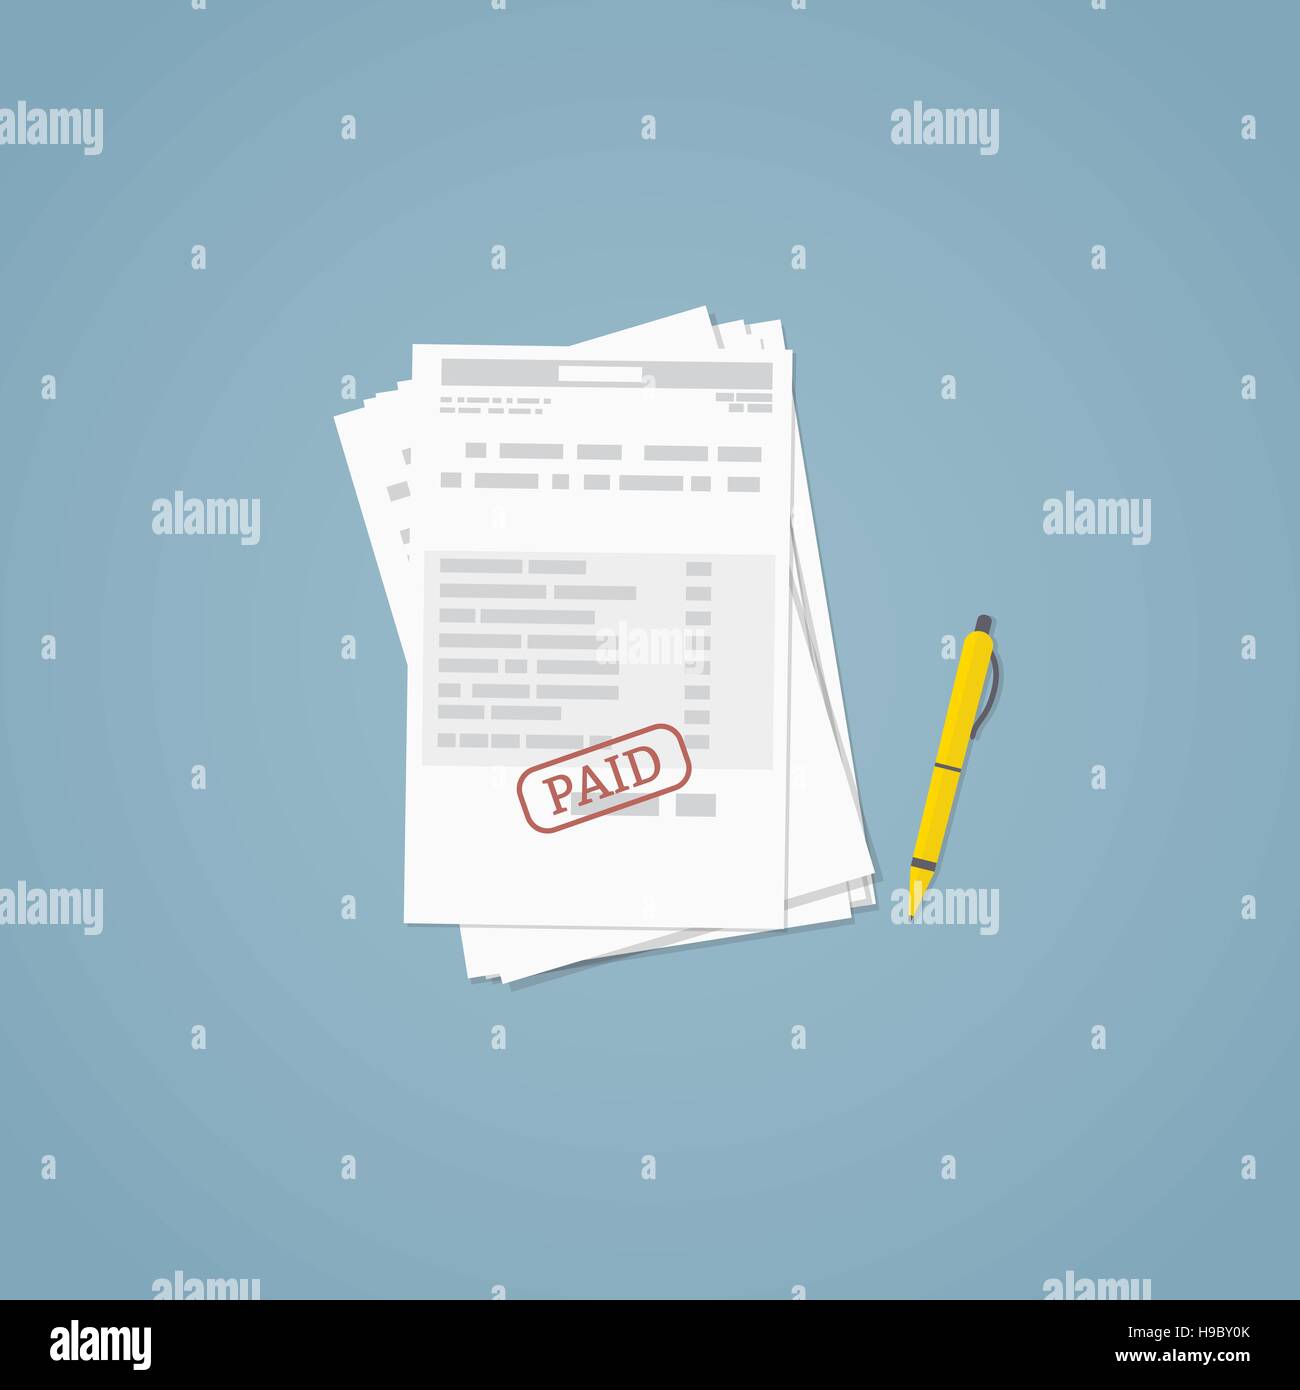 Flat illustration. Documents, business papers. Stamped bill. Stock Vector